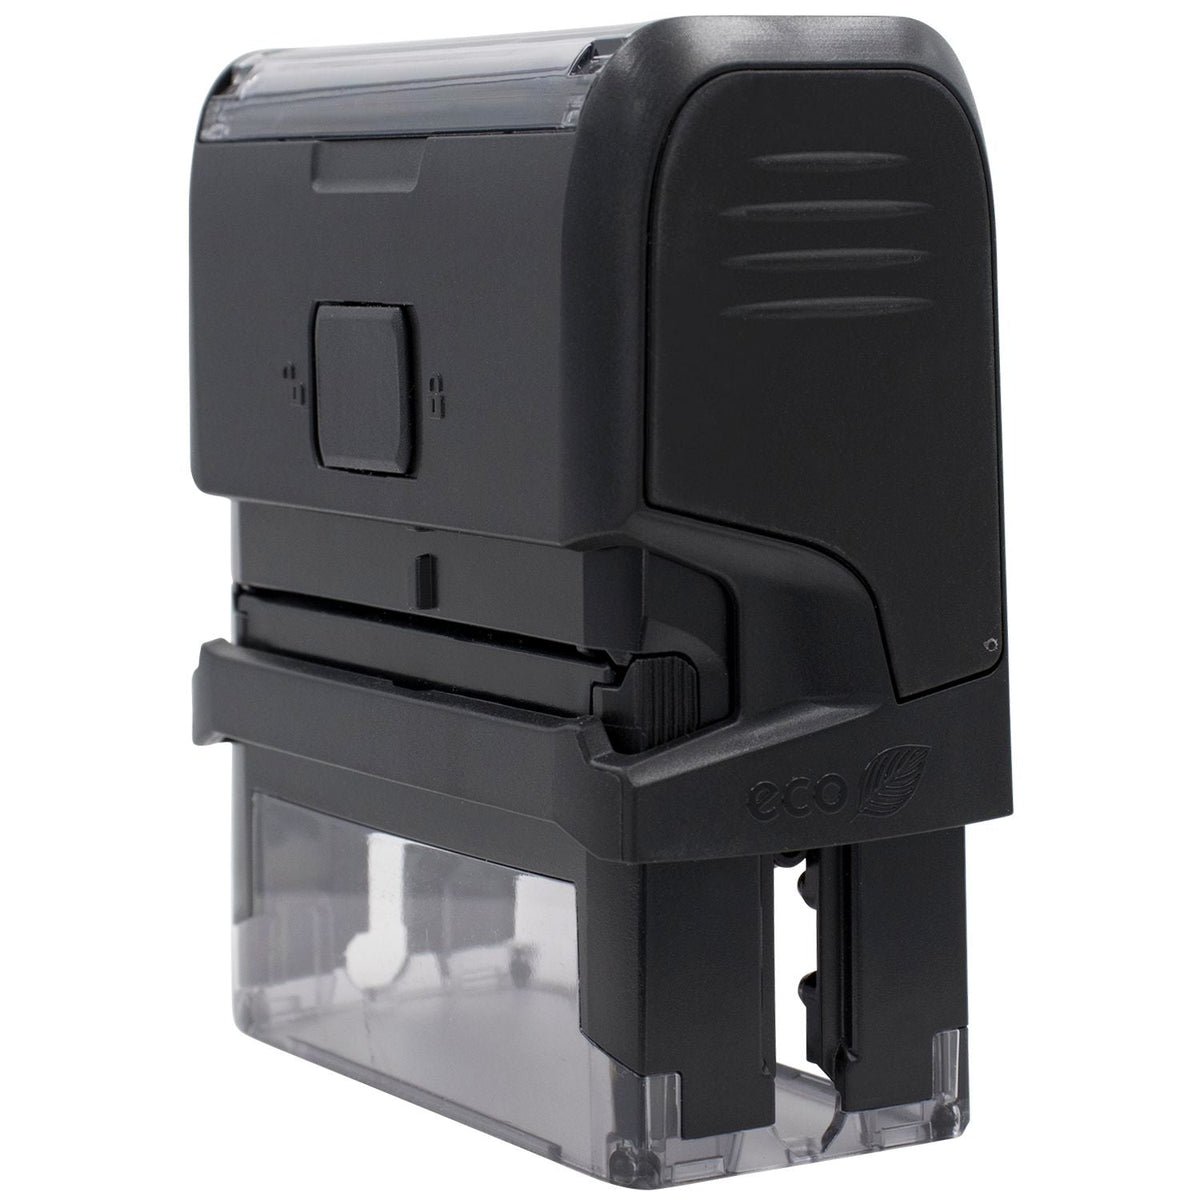 Self-Inking Review and Sign Stamp Side View Angle